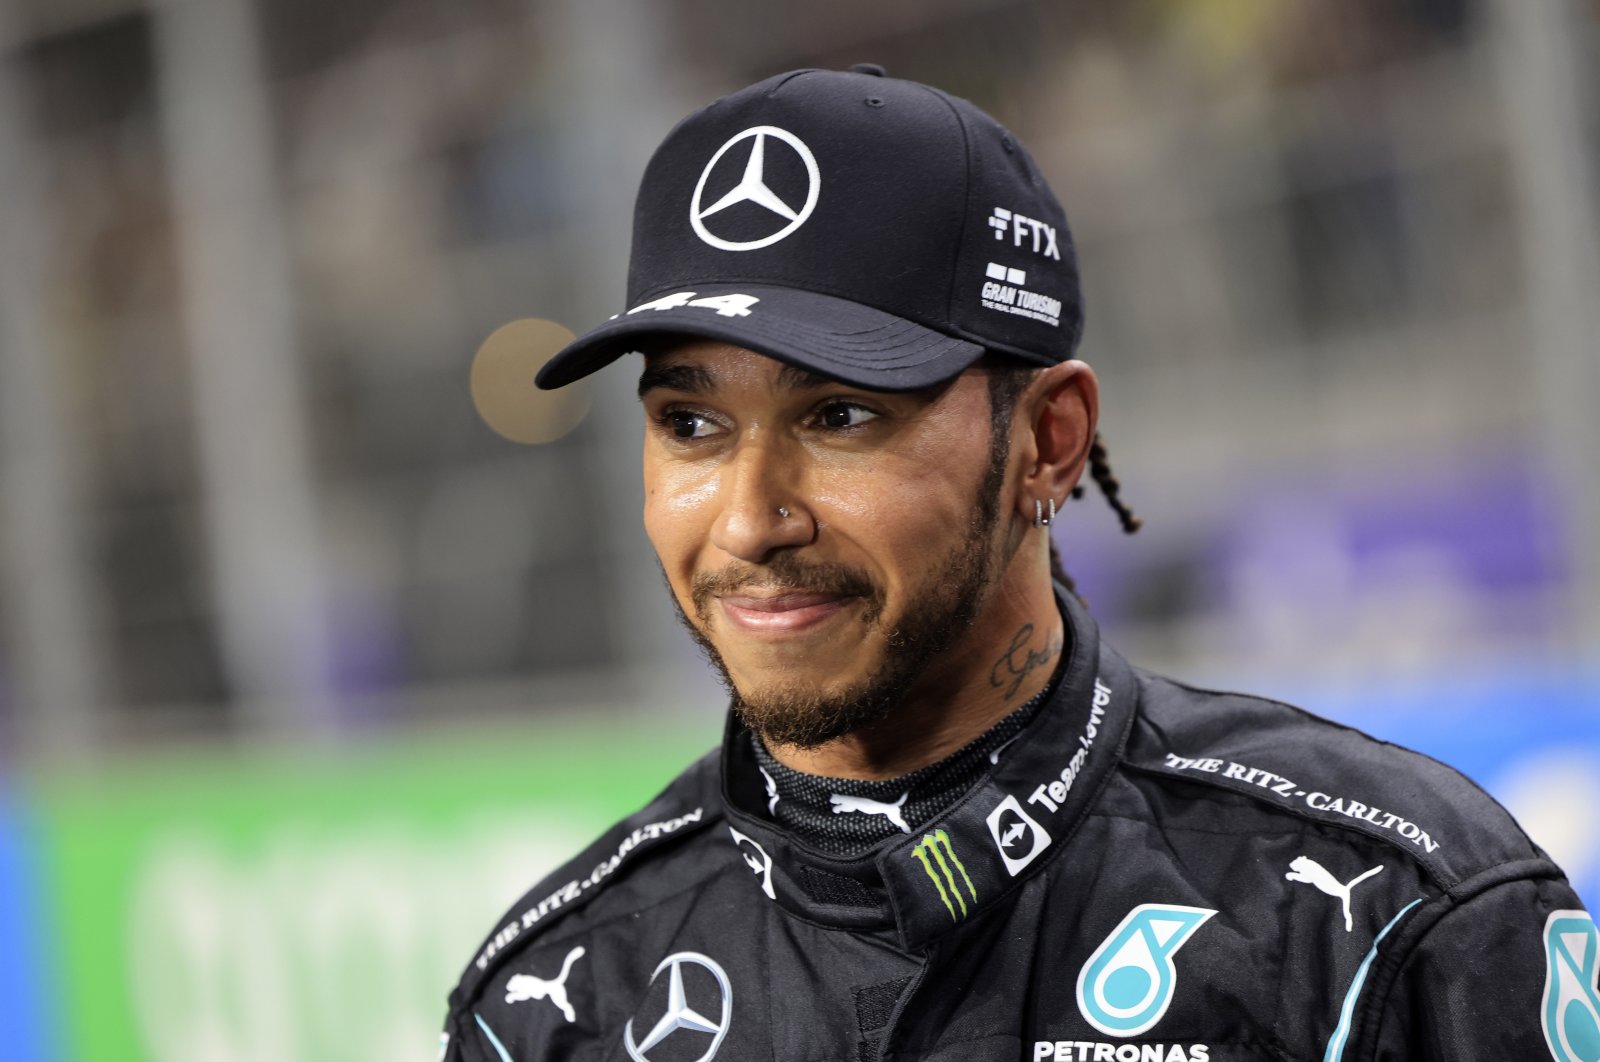 Mercedes driver Lewis Hamilton of Britain smiles after winning the pole position during qualifying for the Formula One Saudi Arabian Grand Prix auto race in Jeddah, Saudi Arabia, Dec. 4, 2021. (AP Photo)